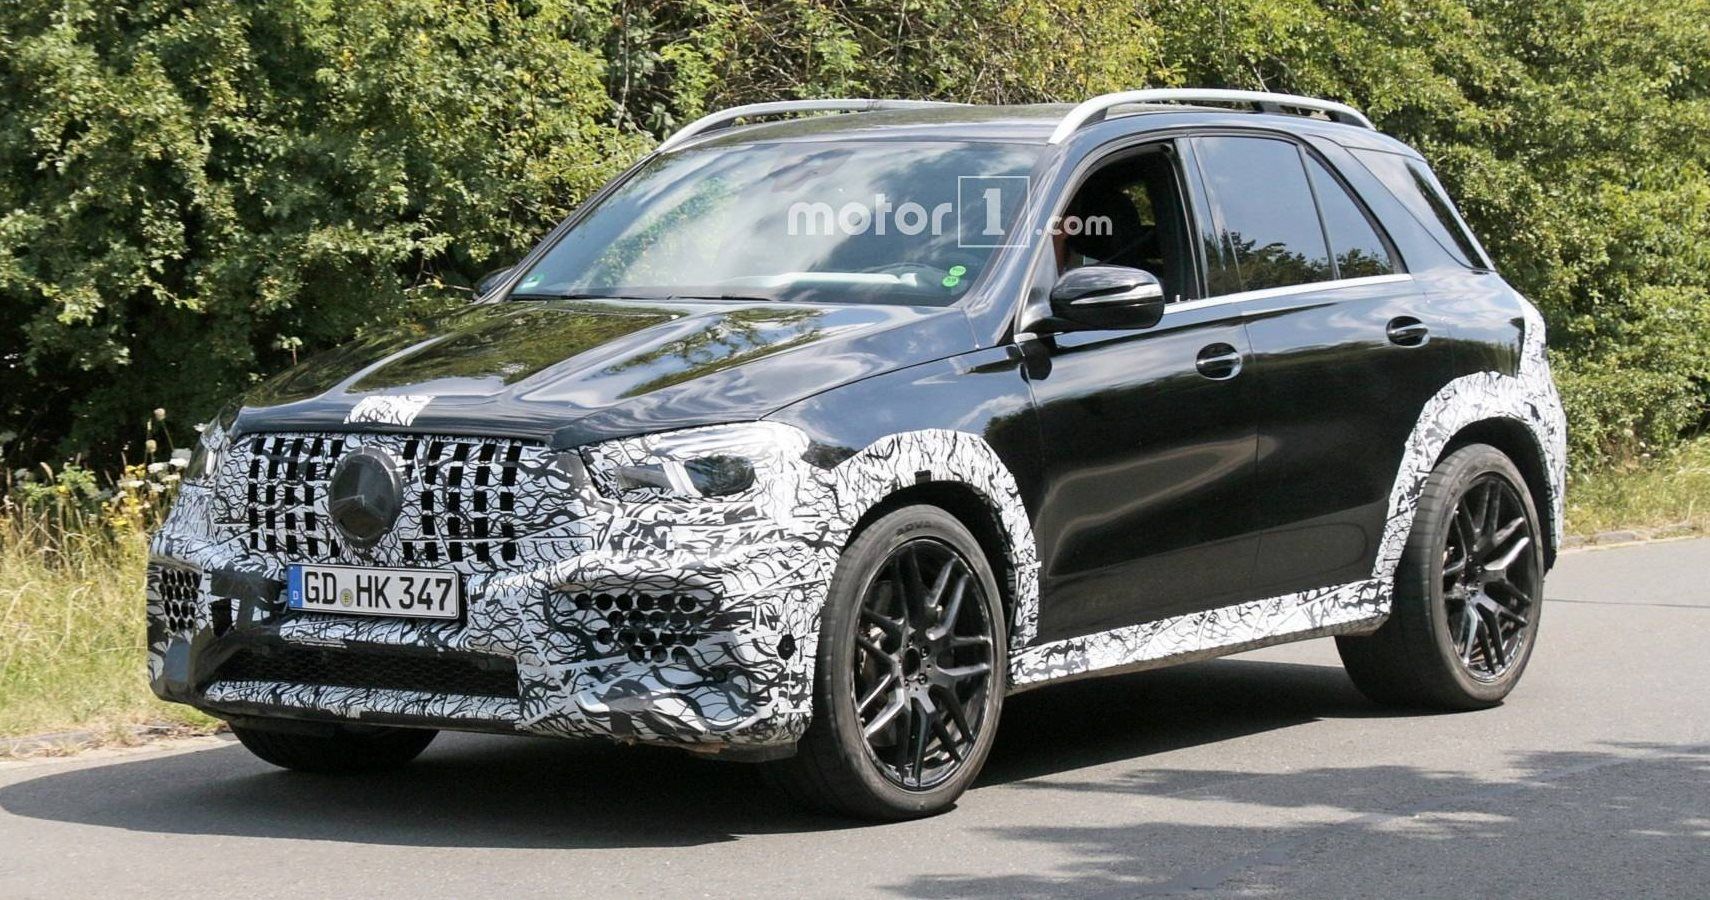 2020 Mercedes-AMG GLE 63 Spotted With Little Camouflage